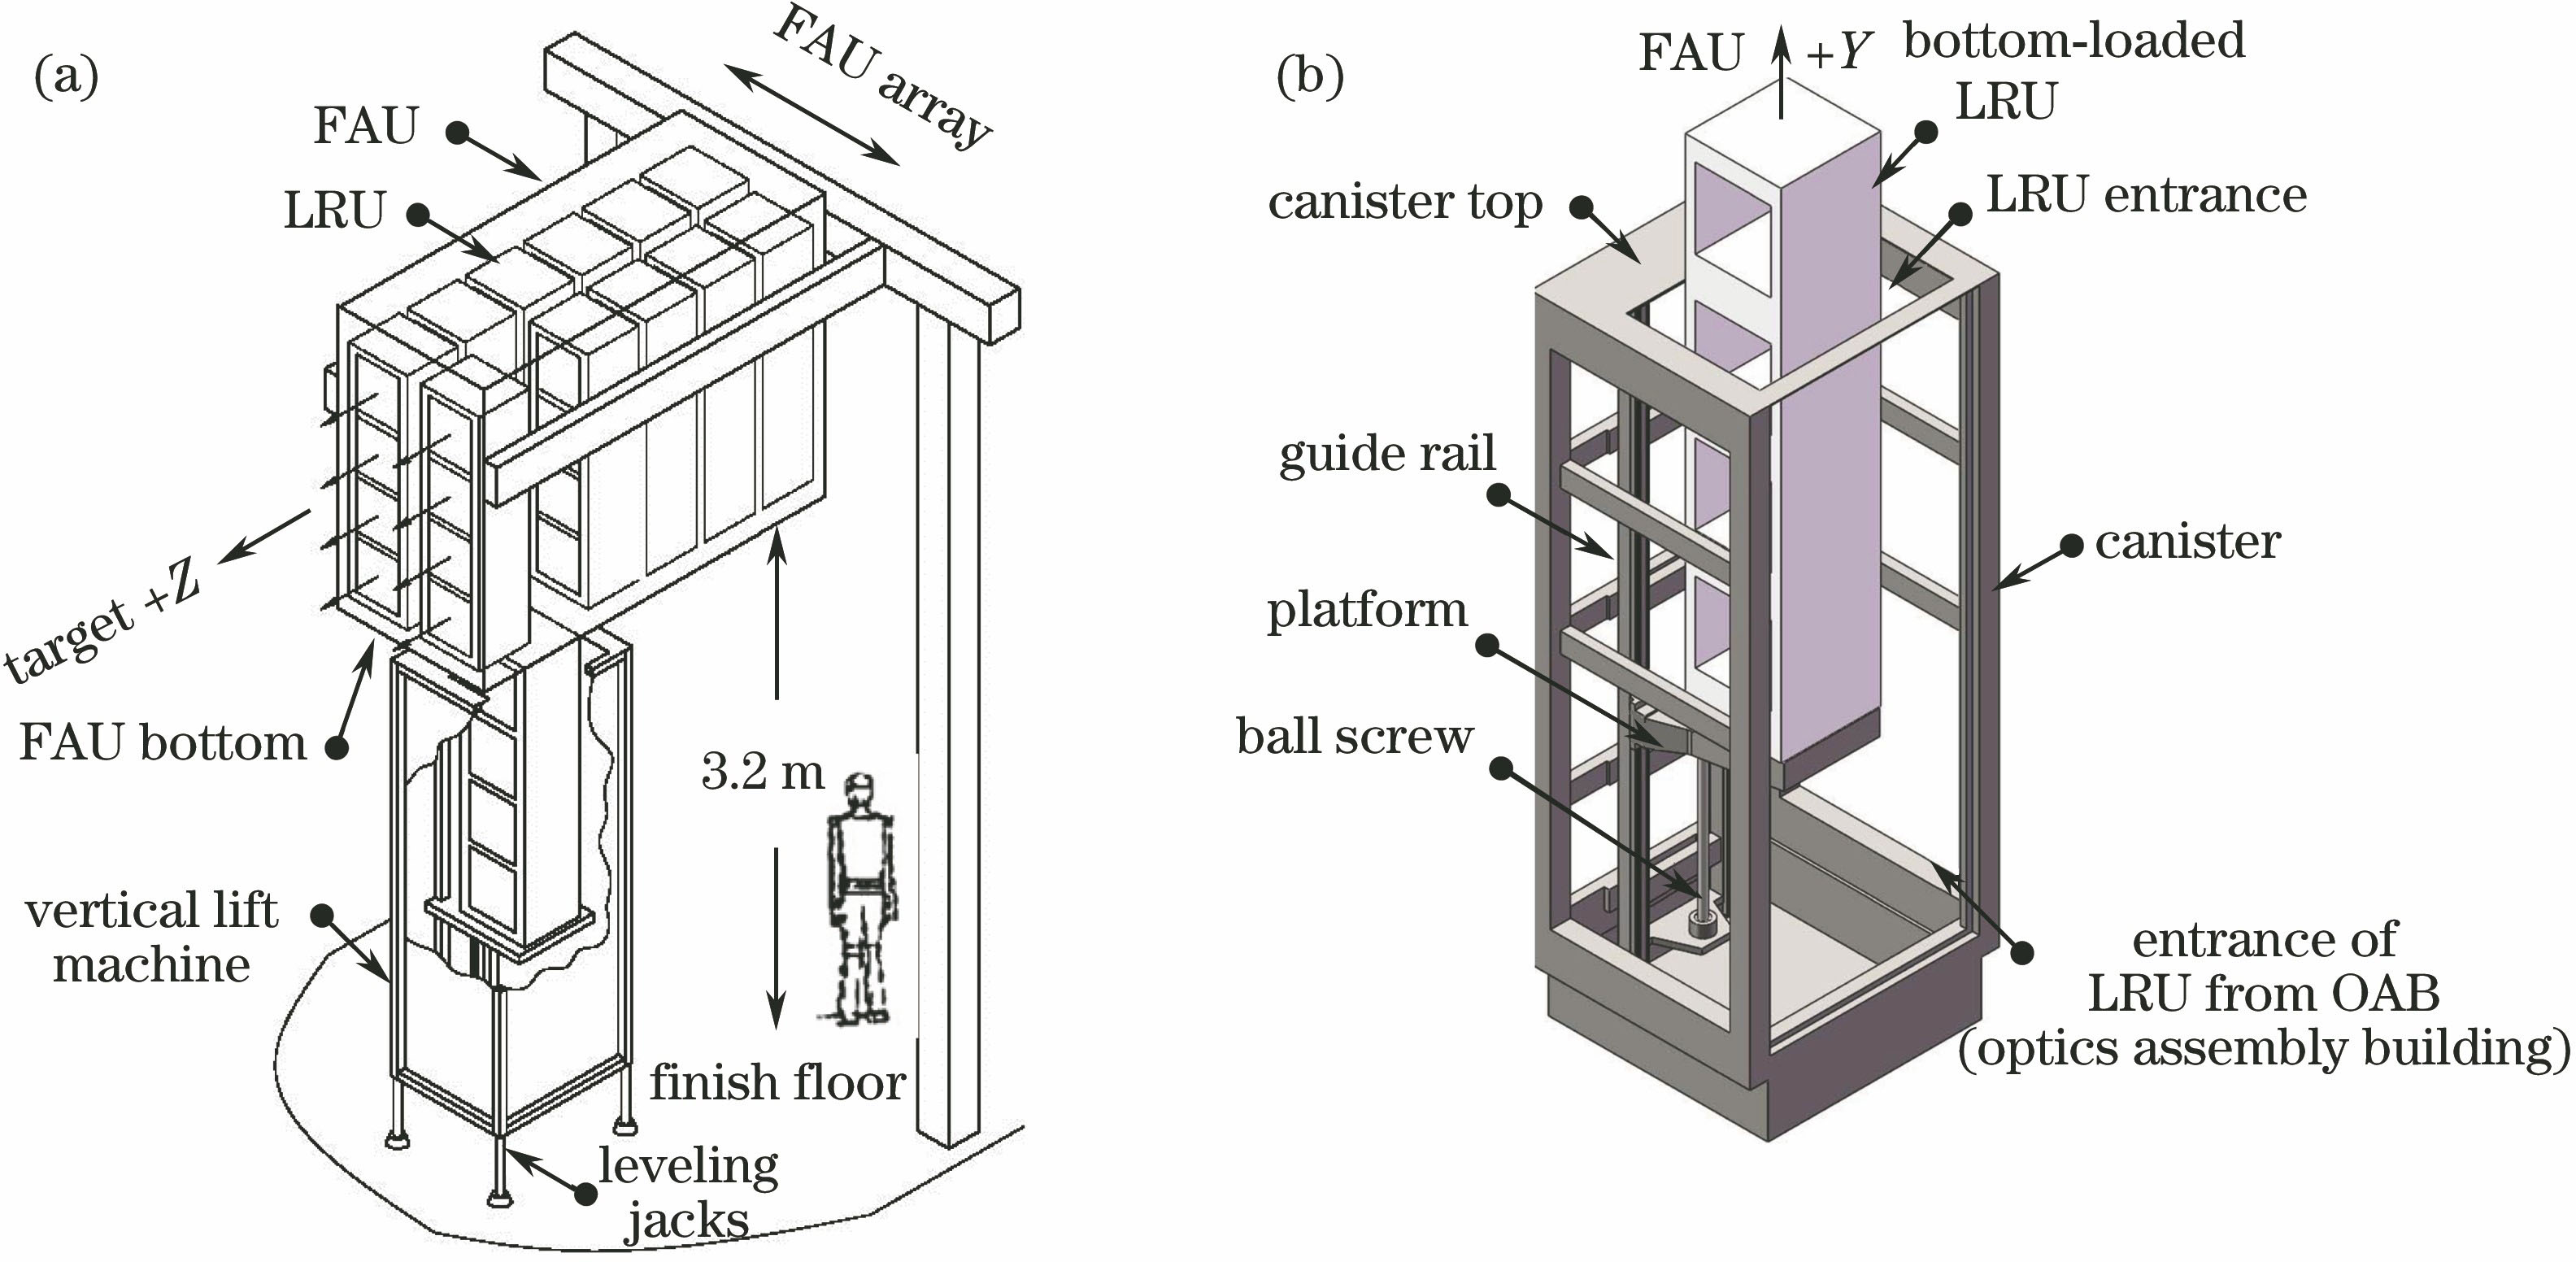 Schematic of (a) FAU spatial layout and (b) vertial lift machine